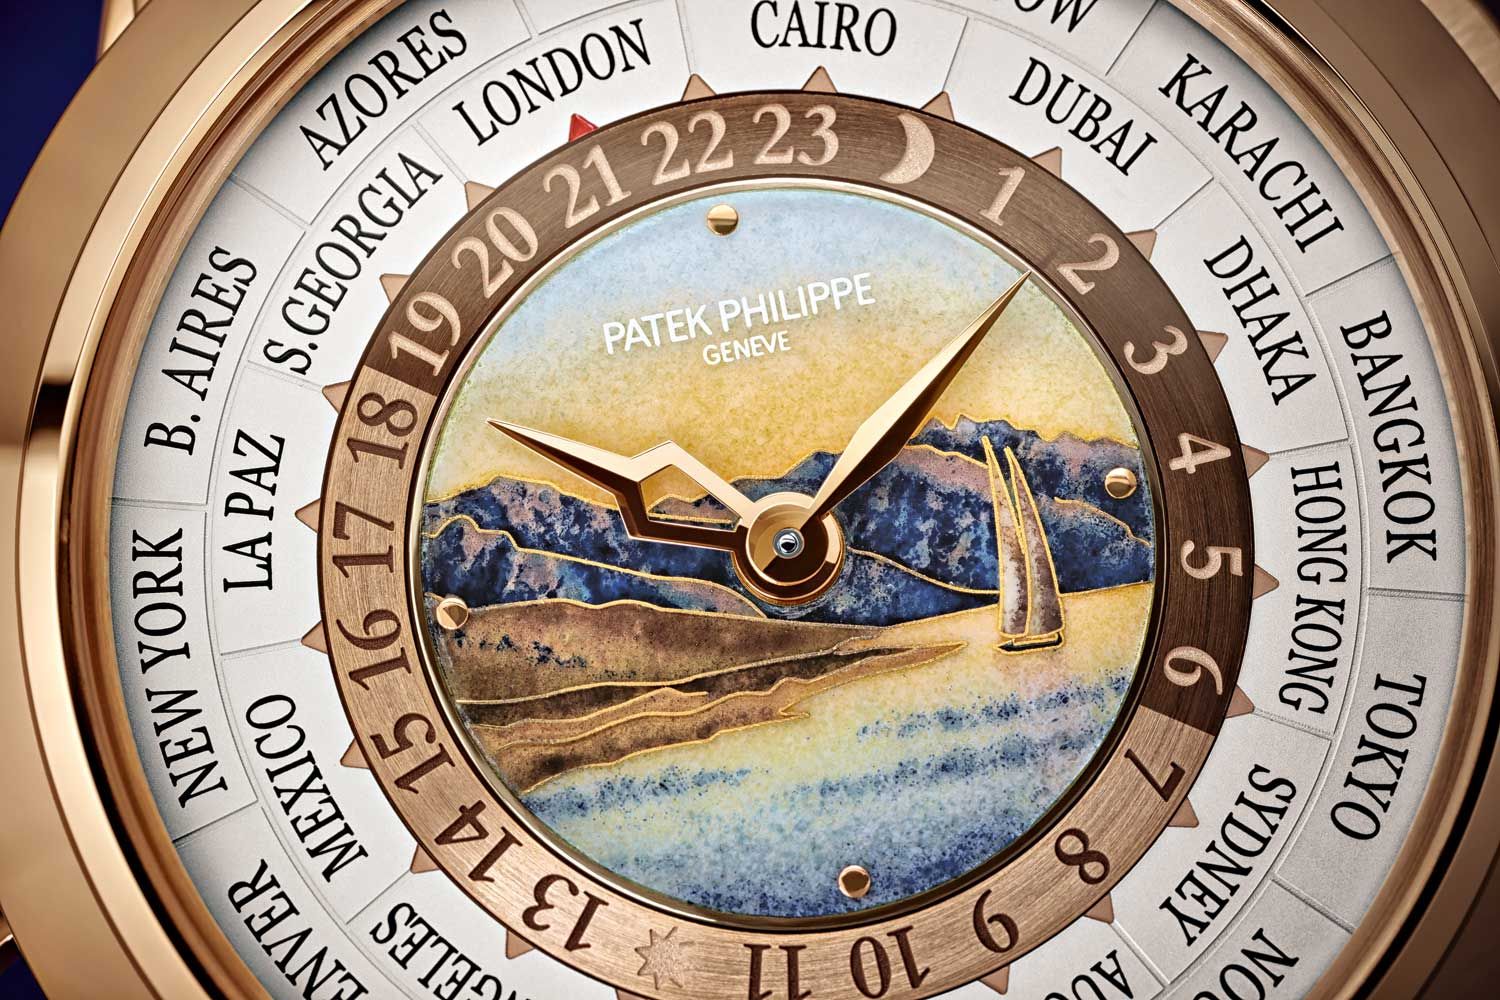 In 2018, Patek Philippe unveiled a regular production 5531R dedicated to depicting a scene of the Lavaux Vineyards, a UNESCO World Heritage Site on the shores of Lake Geneva.